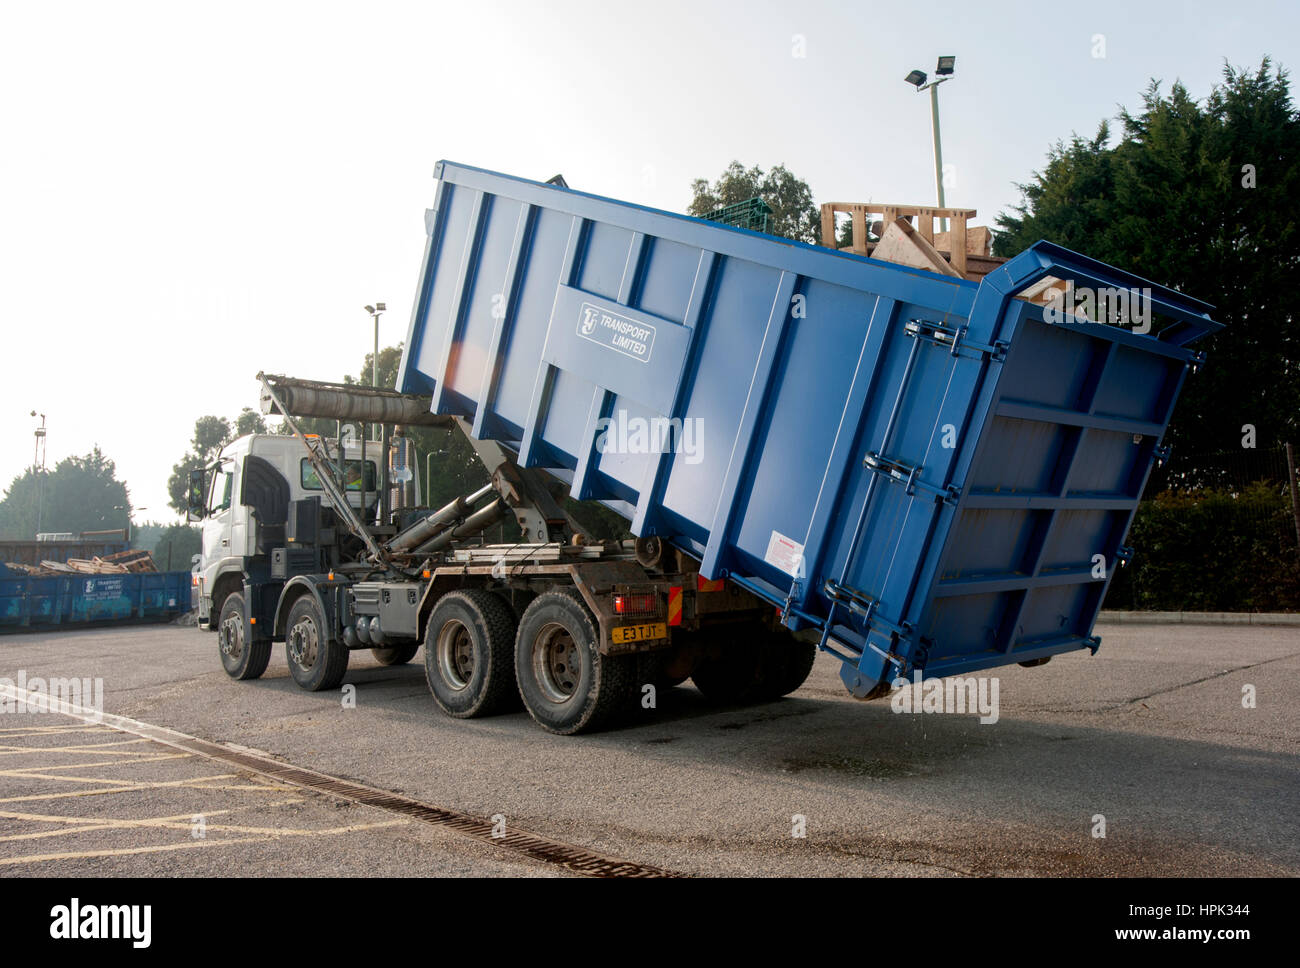 Commercial skip lorry loading a large waste dumpster Stock Photo